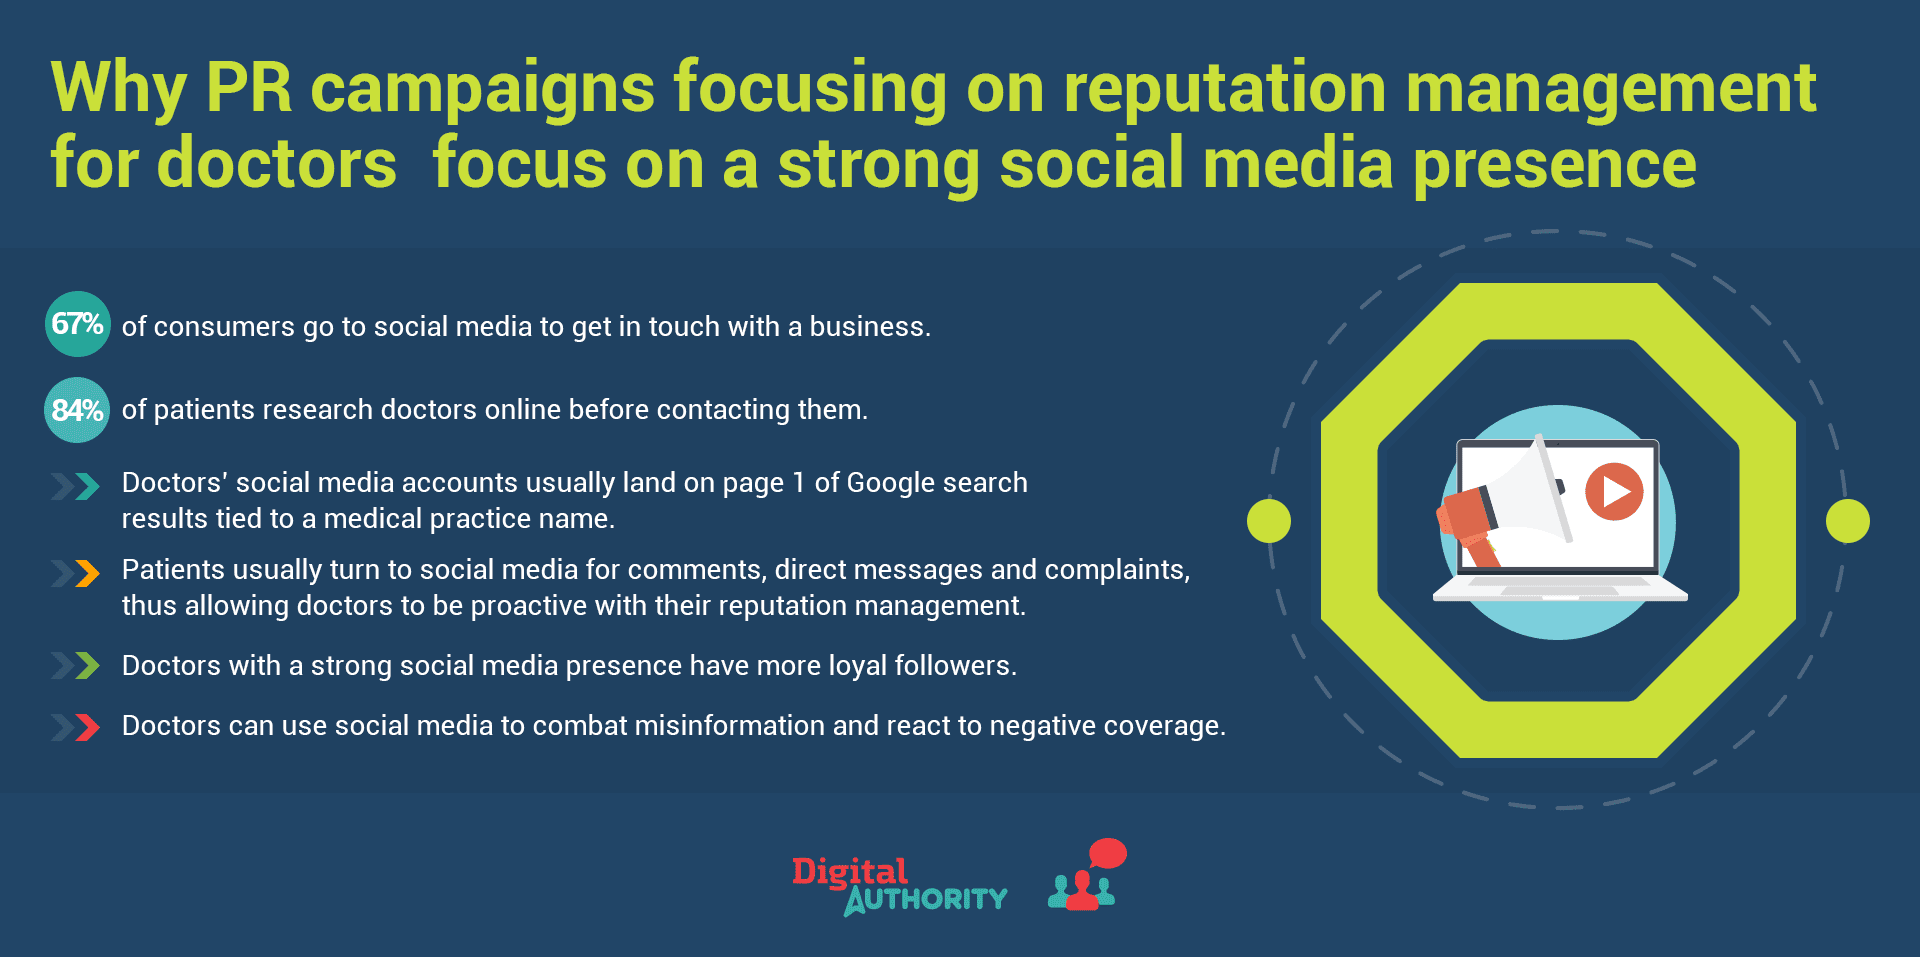 Graphic explaining why PR campaigns focusing on reputation management for doctors focus on strong social media presence